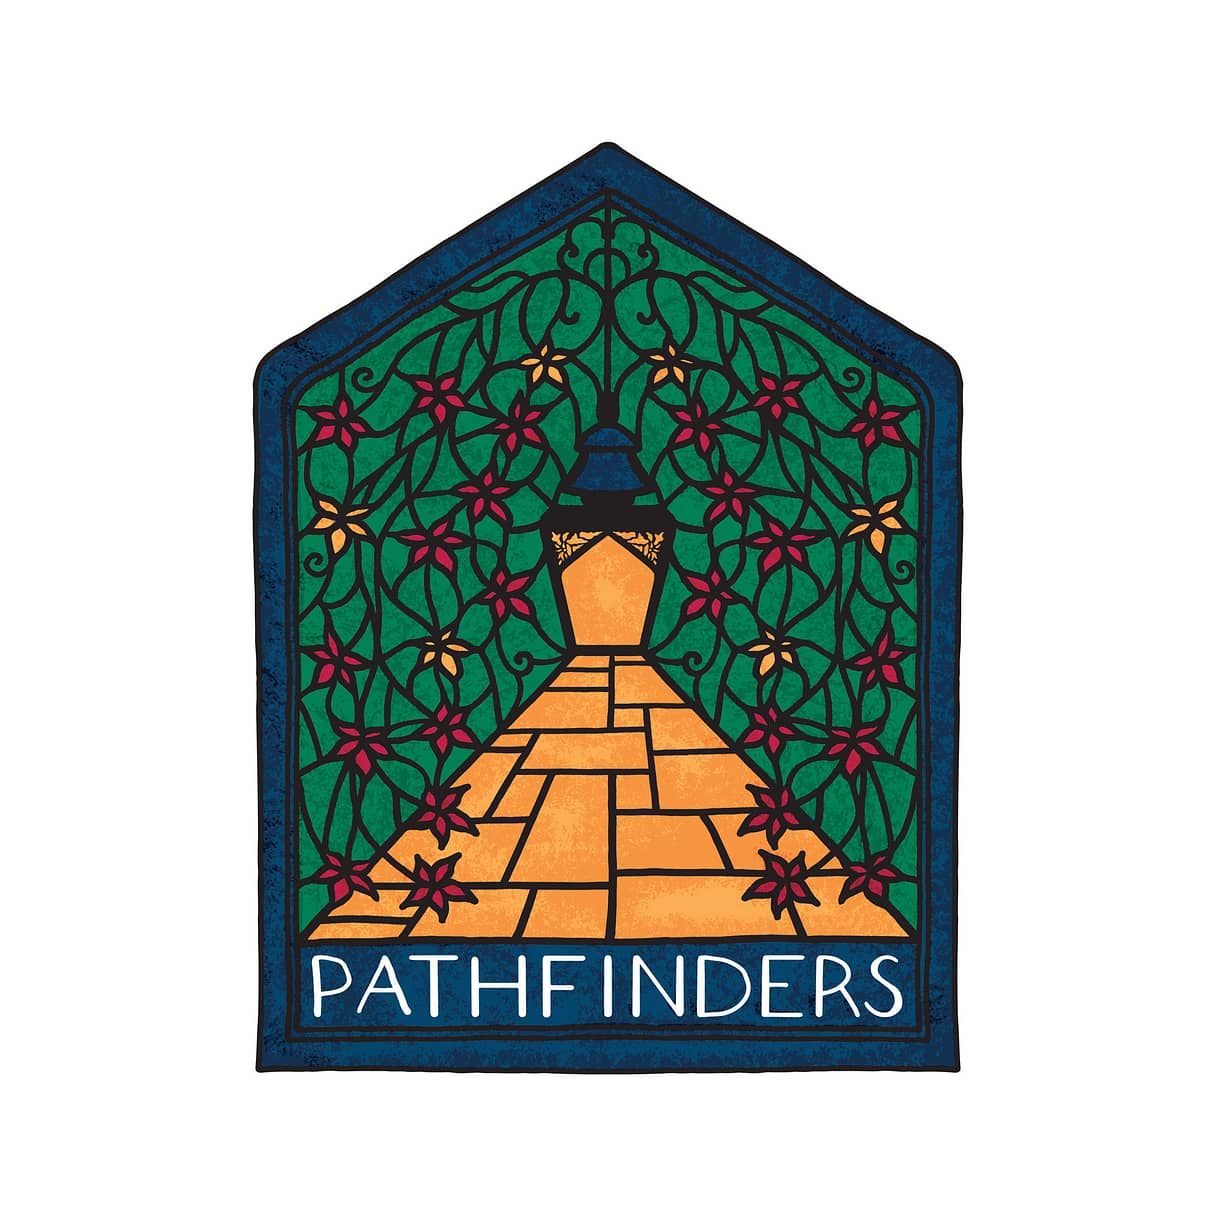 Illustrated logo of a walkway that leads to a gate that is also a lantern hanging from above. The text PATHFINDERS is also visible at the bottom. The image recalls the look and feel of a stain-glass window.